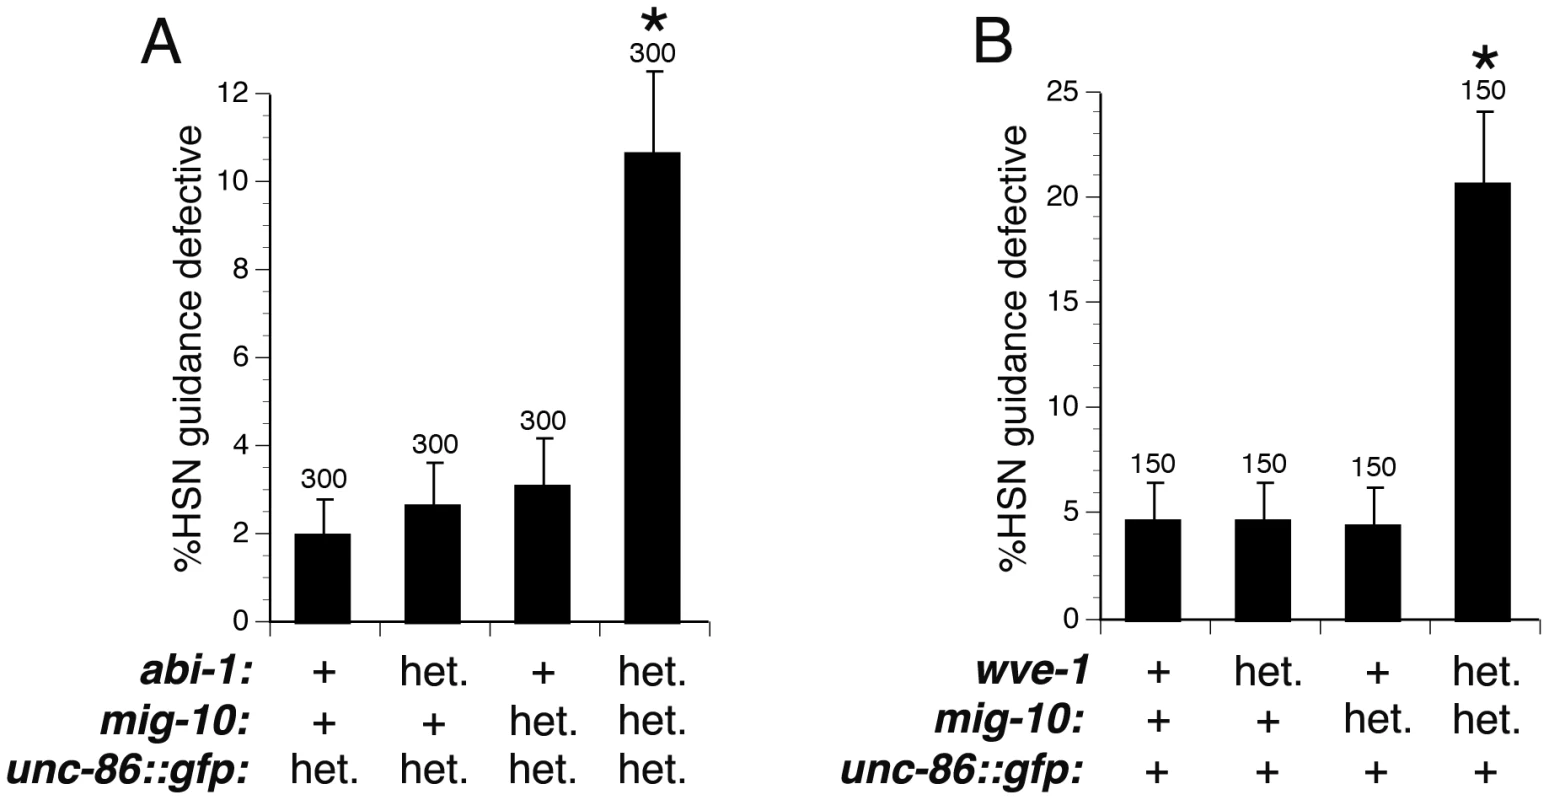 Dosage-sensitive genetic interactions indicate that MIG-10, ABI-1, and WVE-1 function together to mediate axon guidance.